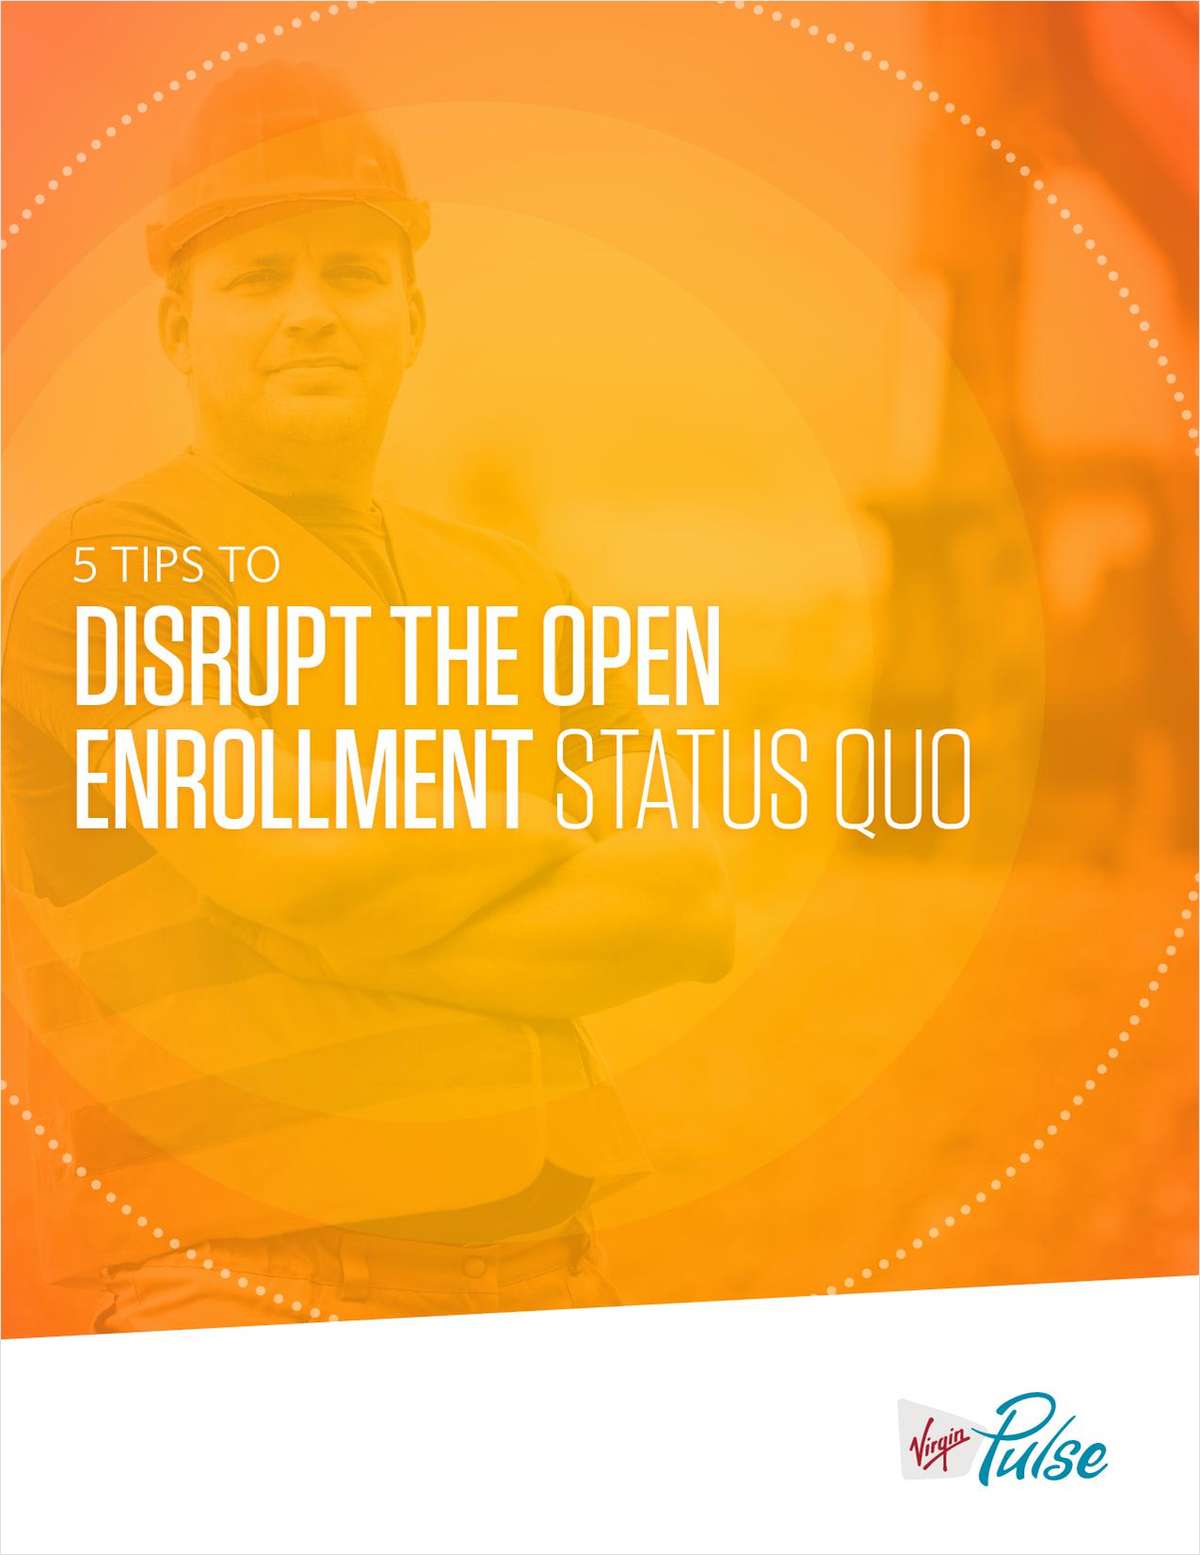 5 Tips to Disrupt the Open Enrollment Status Quo